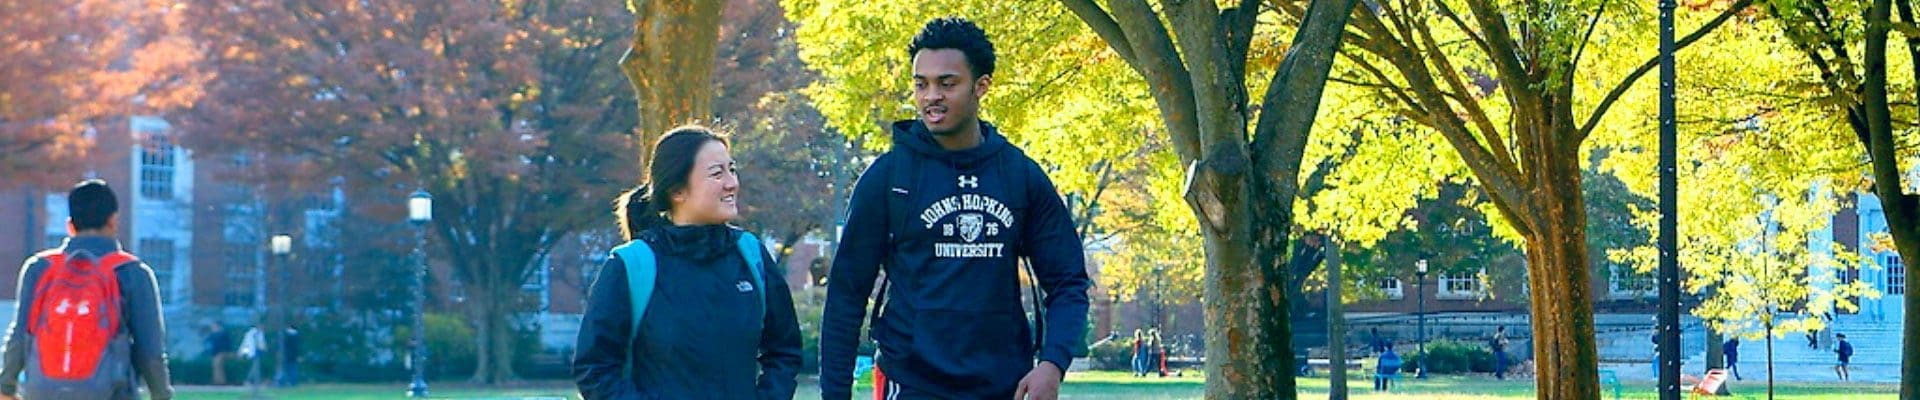 two students walking outdoors on campus